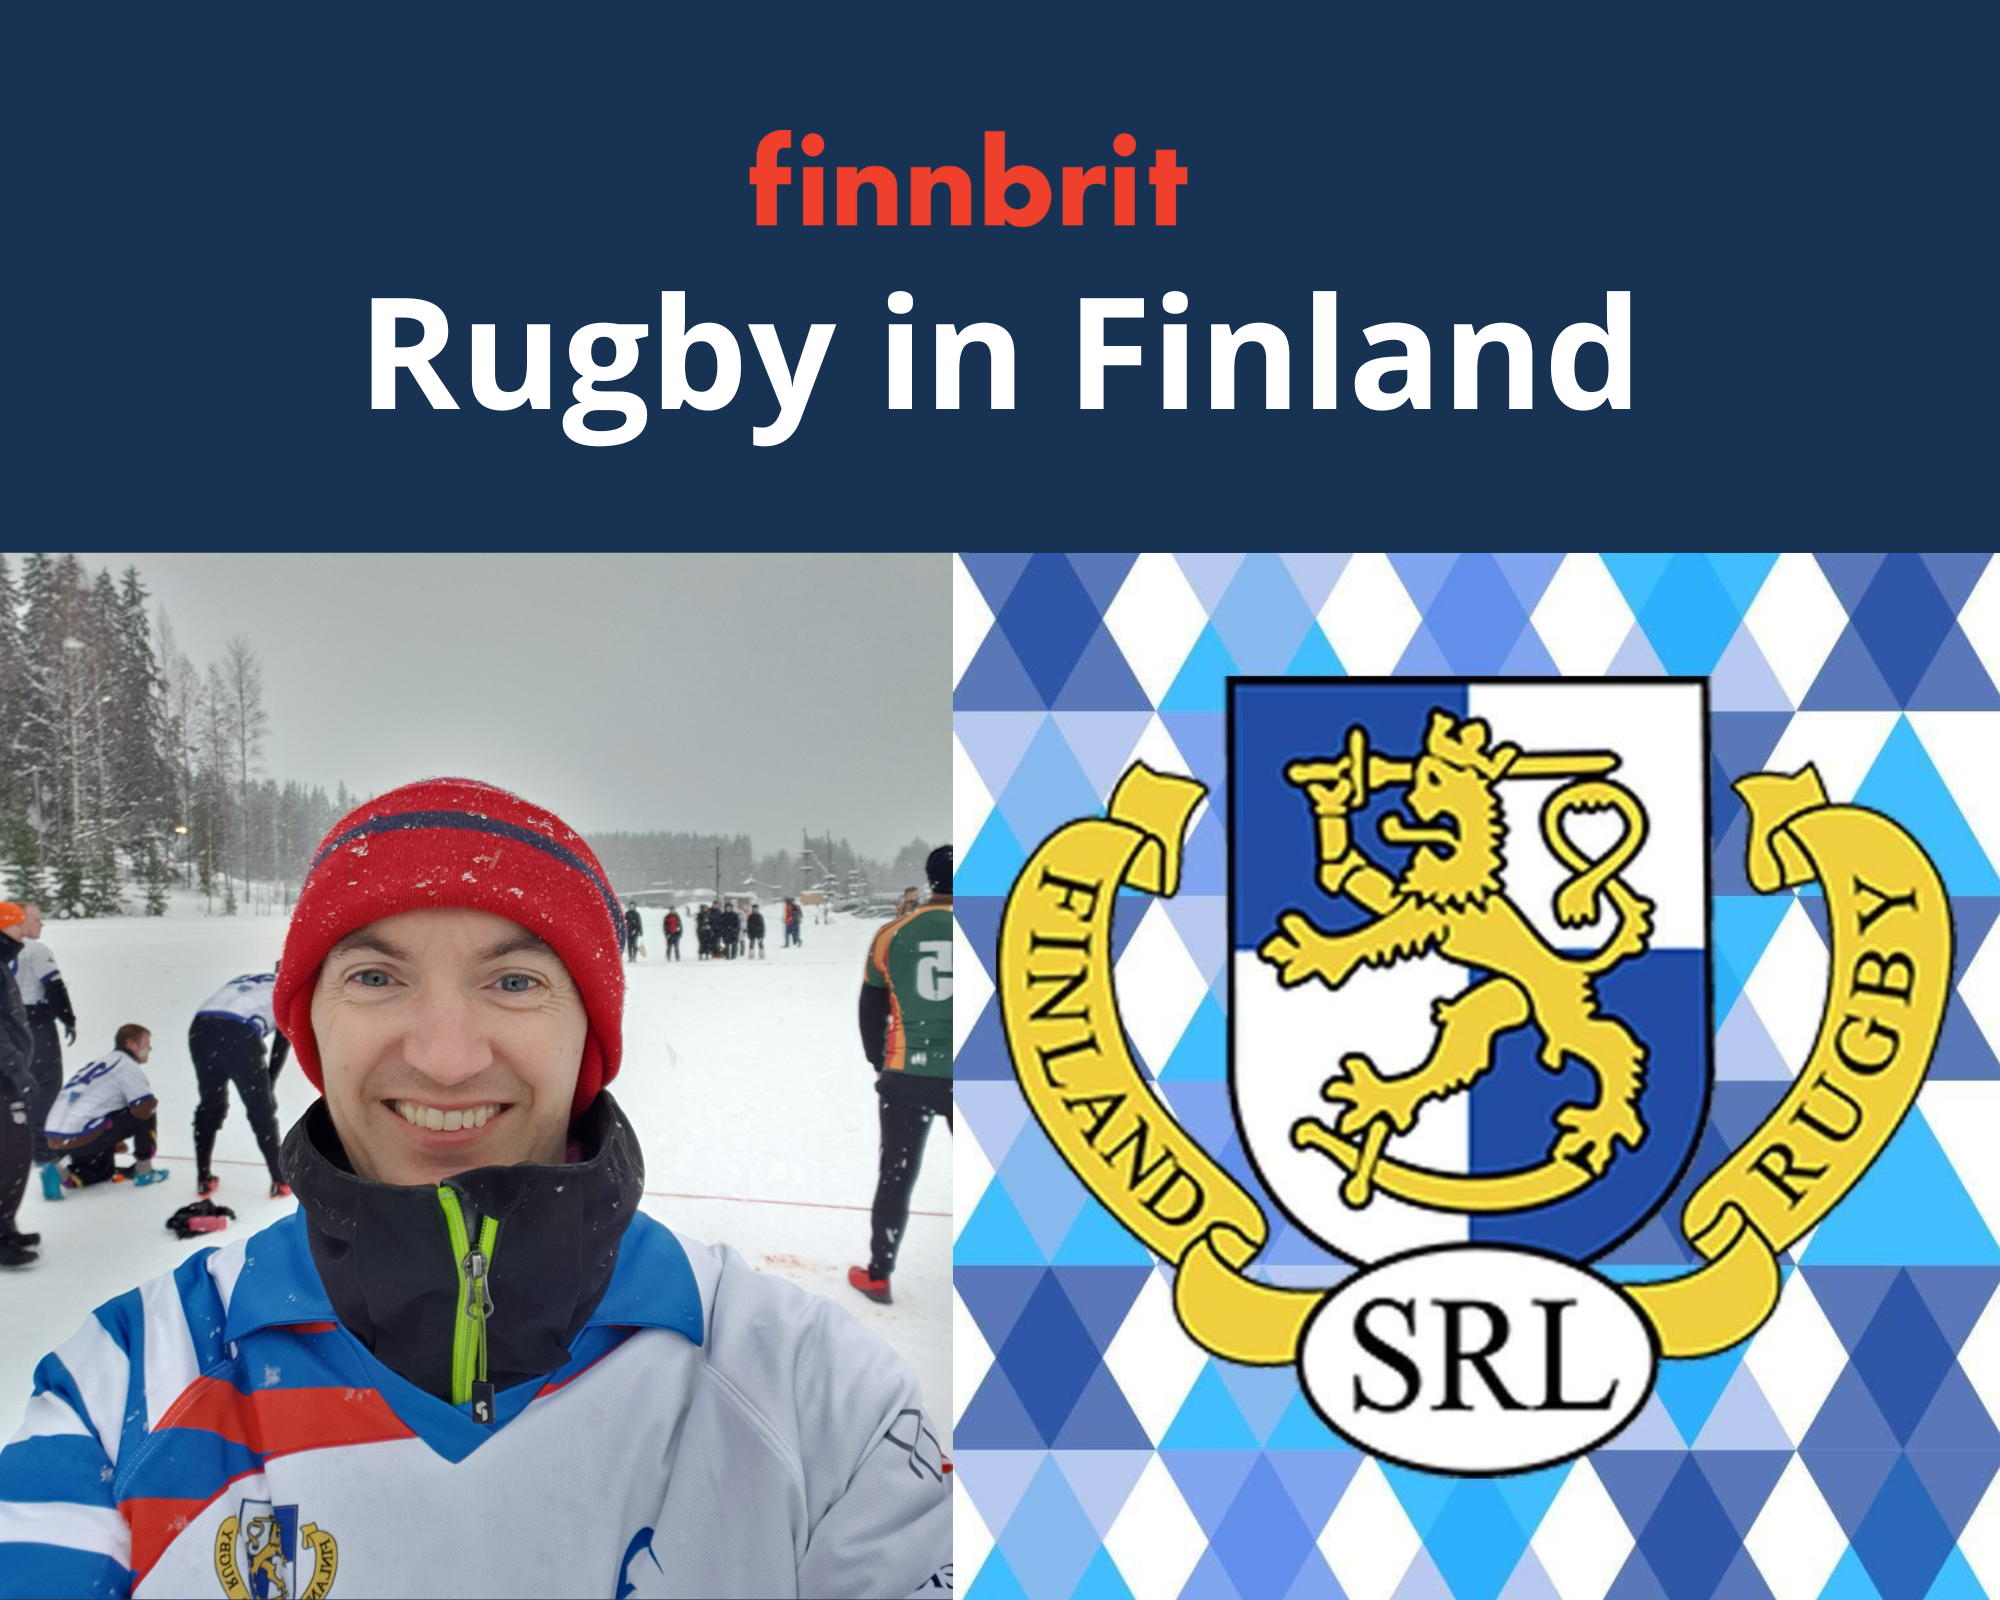 A photo of George Mossford who is a rugby referee in Finland and the Finland Rugby logo